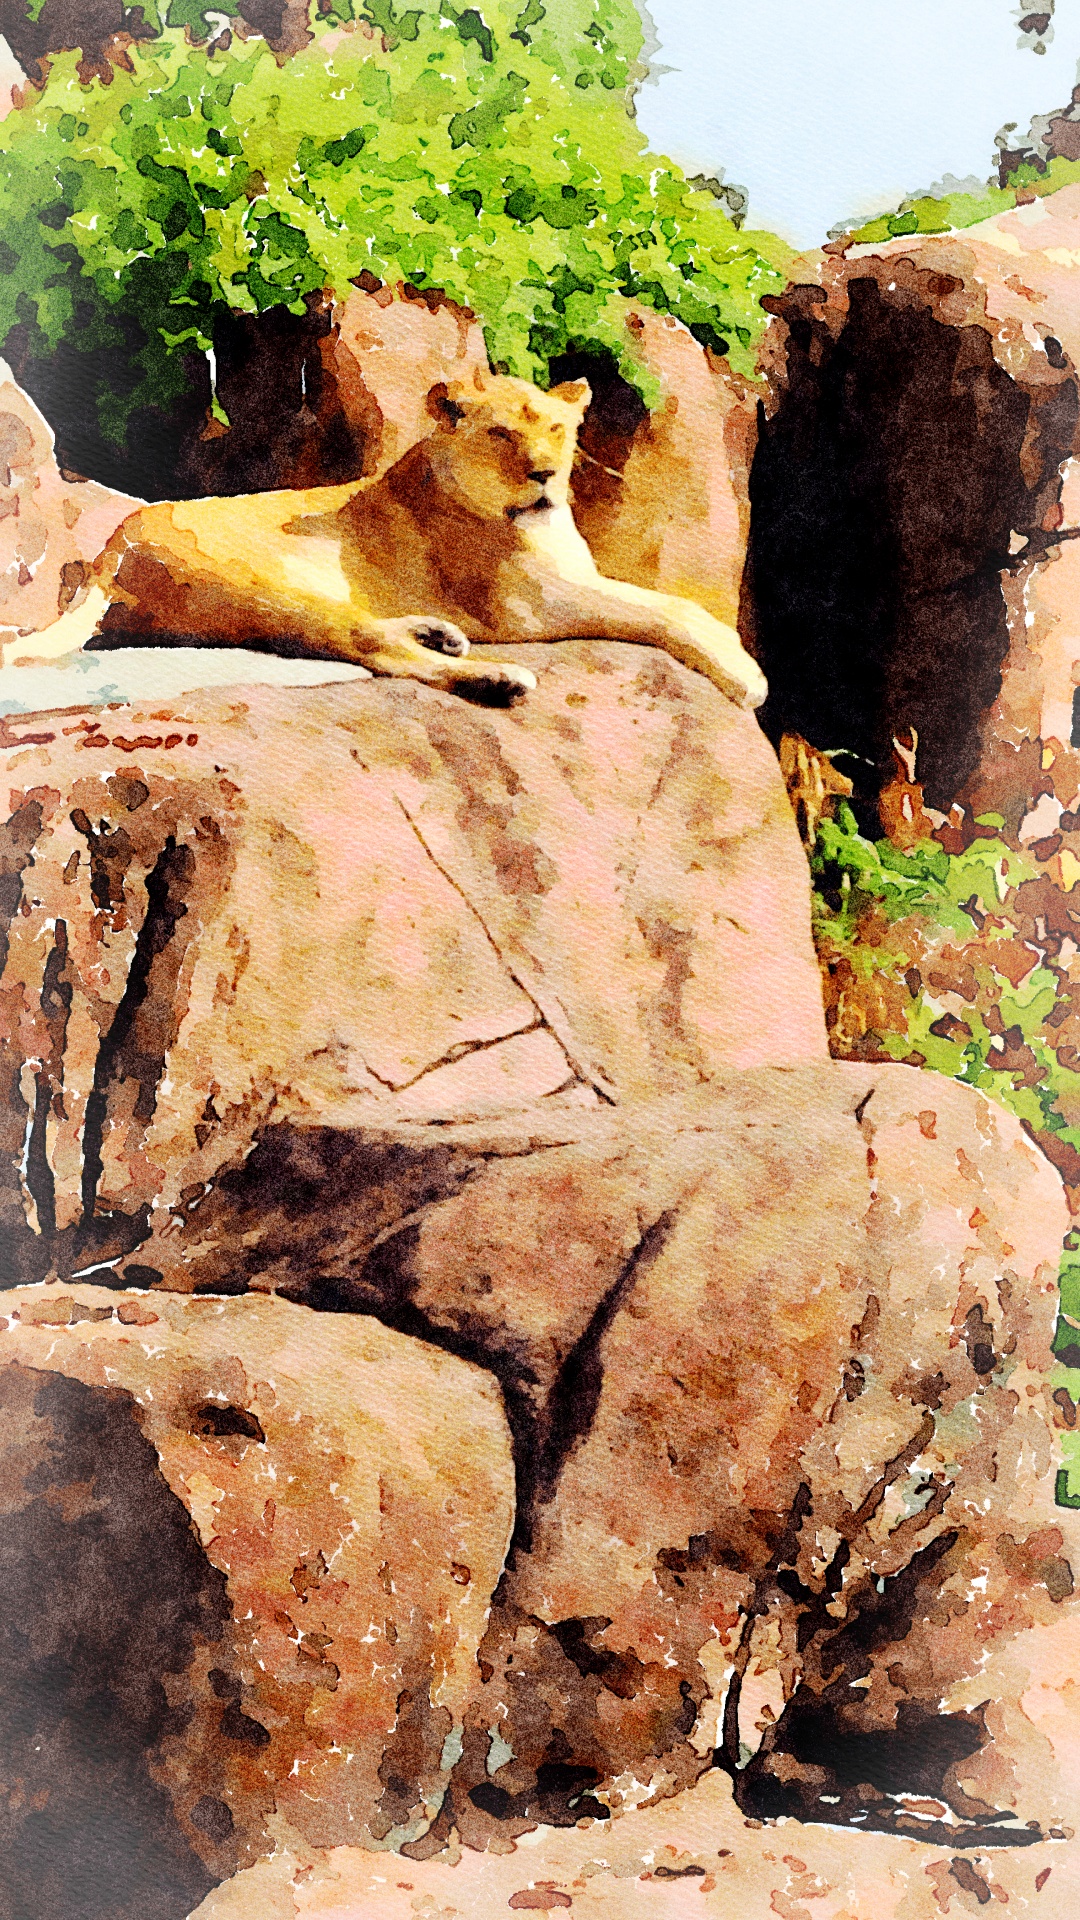 Lion sitting one Rock, Africa.